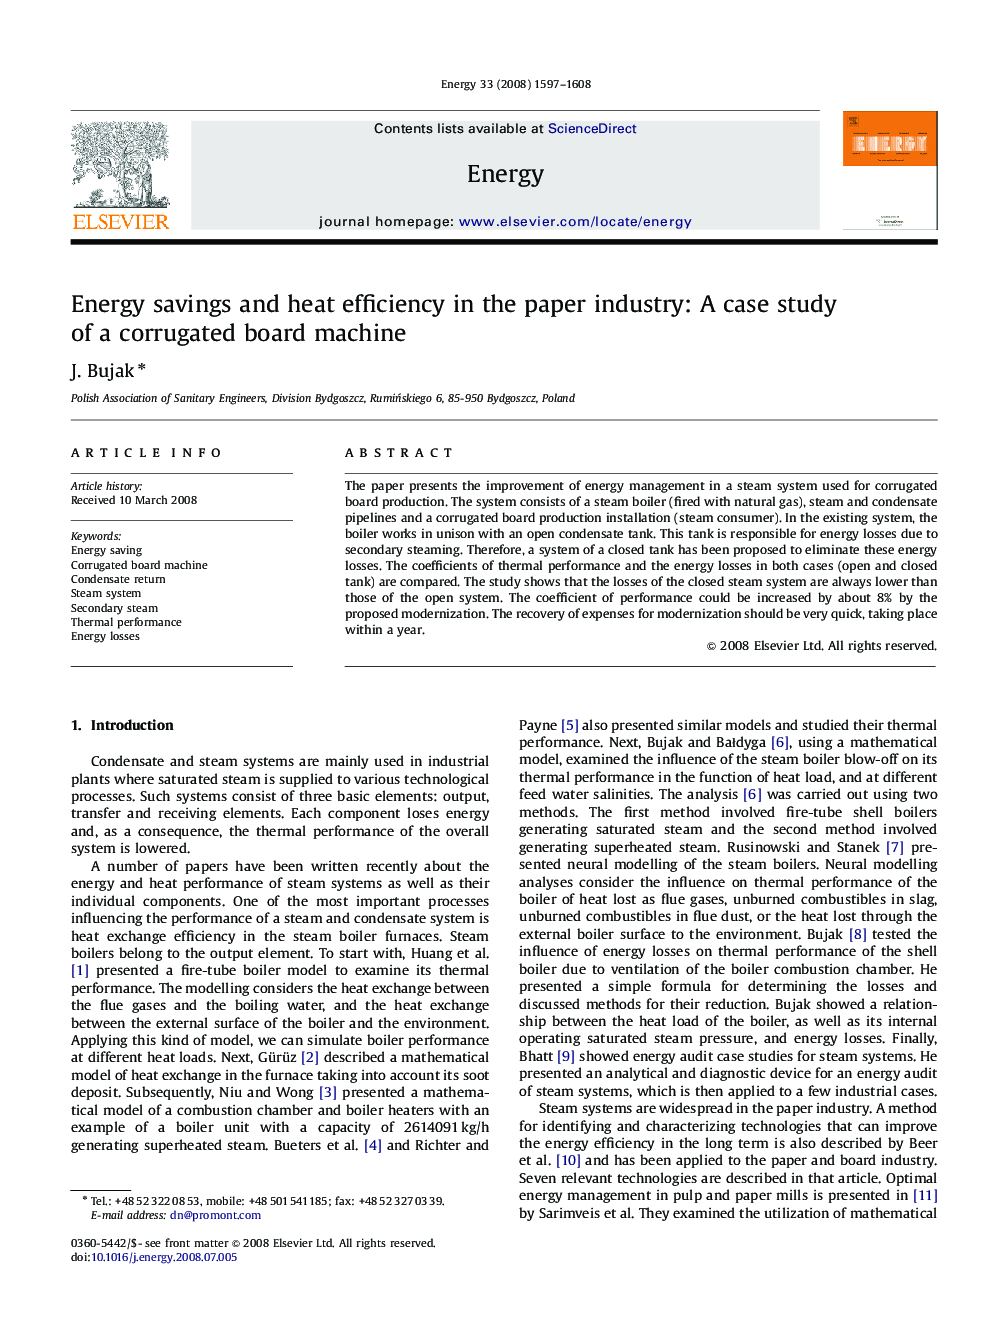 Energy savings and heat efficiency in the paper industry: A case study of a corrugated board machine